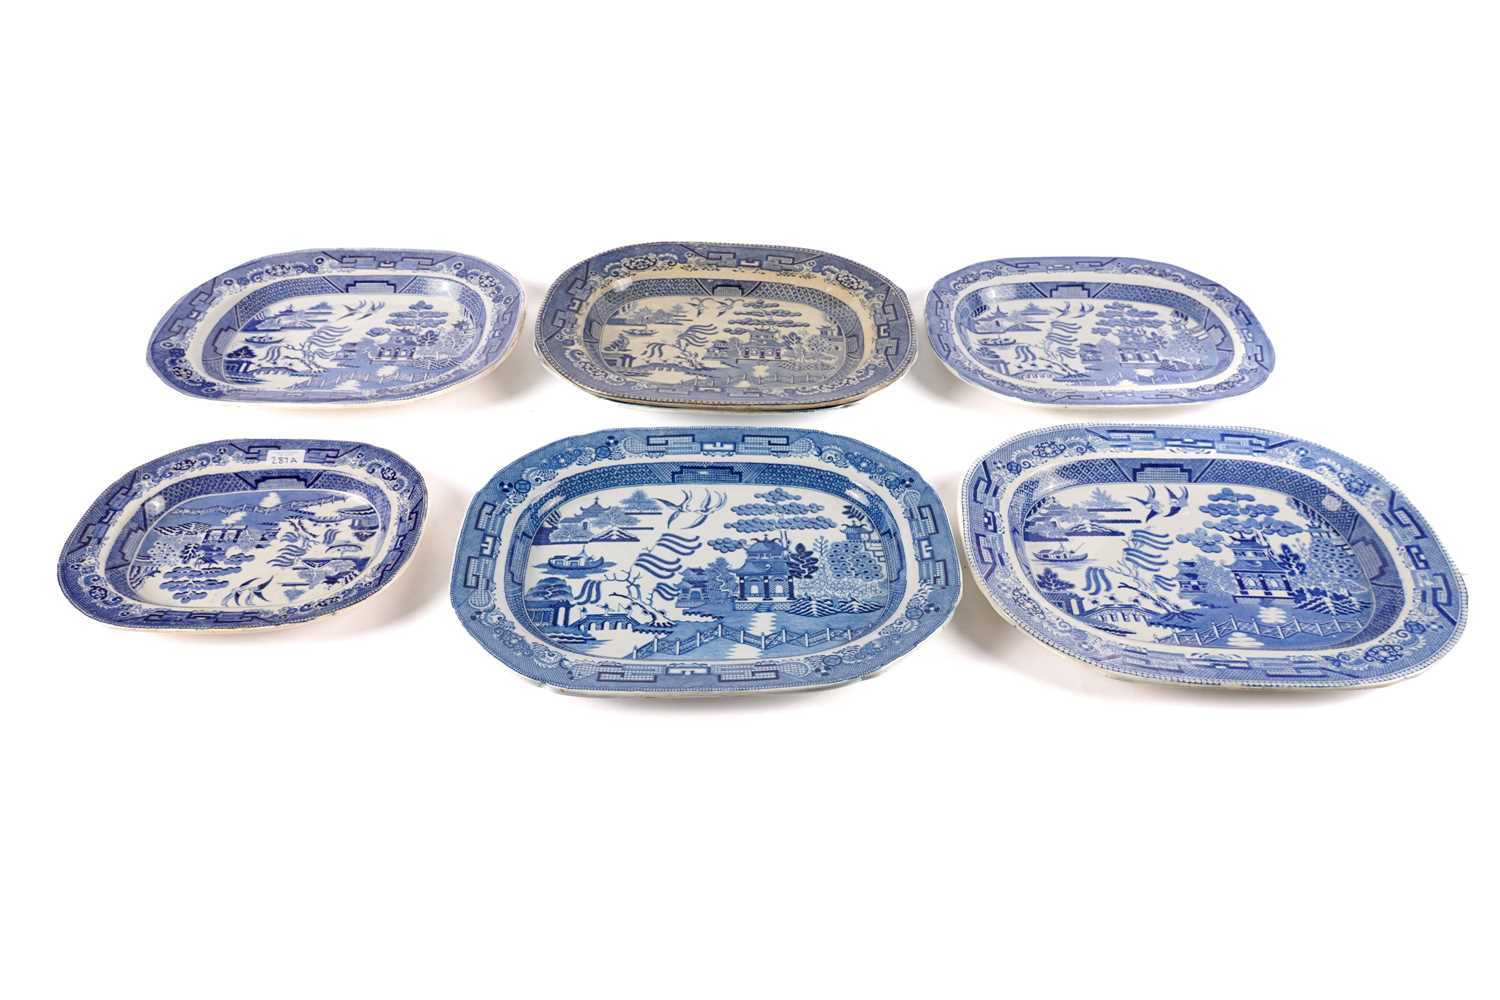 A collection of blue and white meat plates